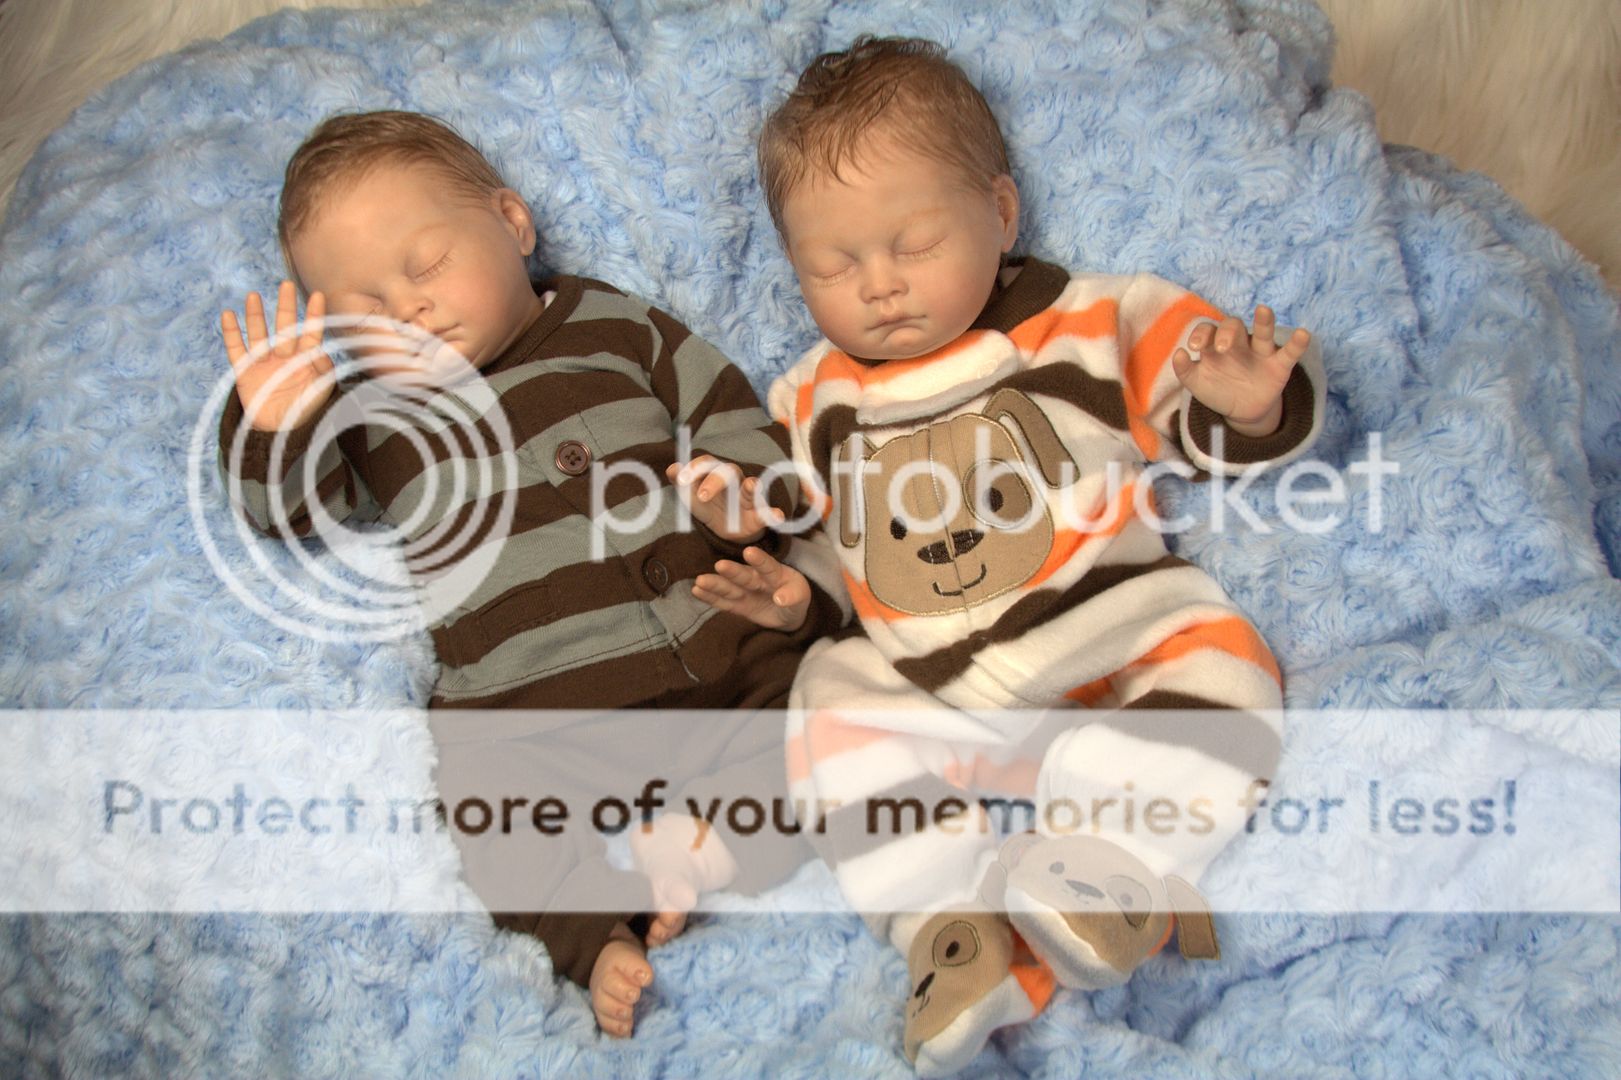 Reborn Baby Boy or Girl Twins You Decide 2 Babies for The Price of 1